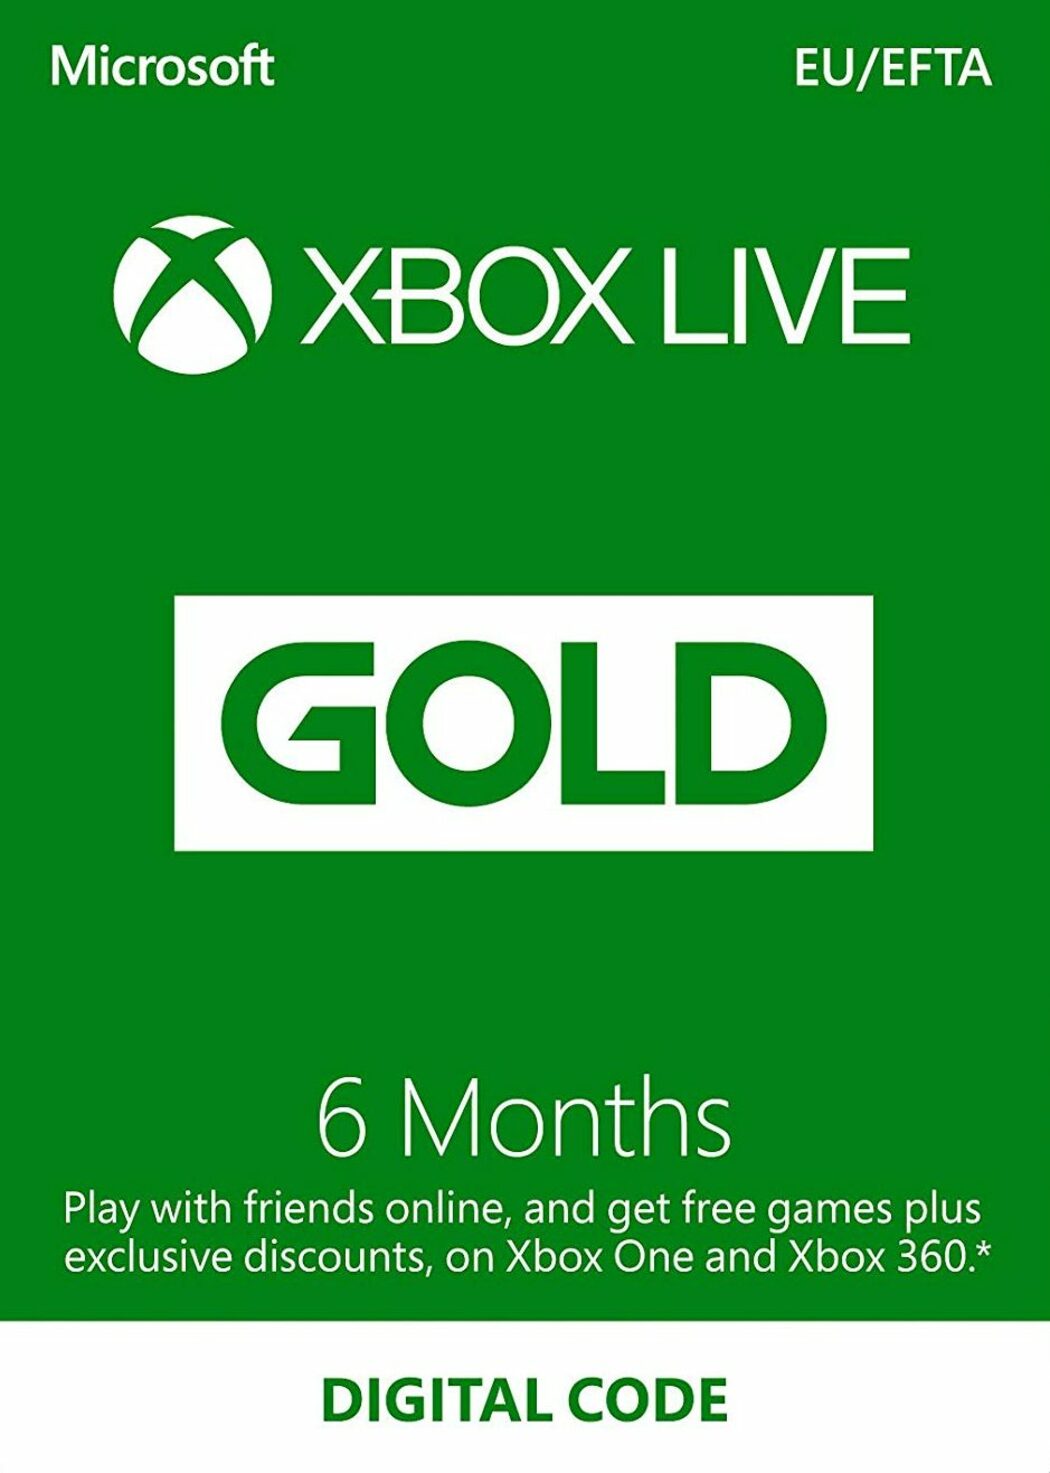 6 months gold xbox live